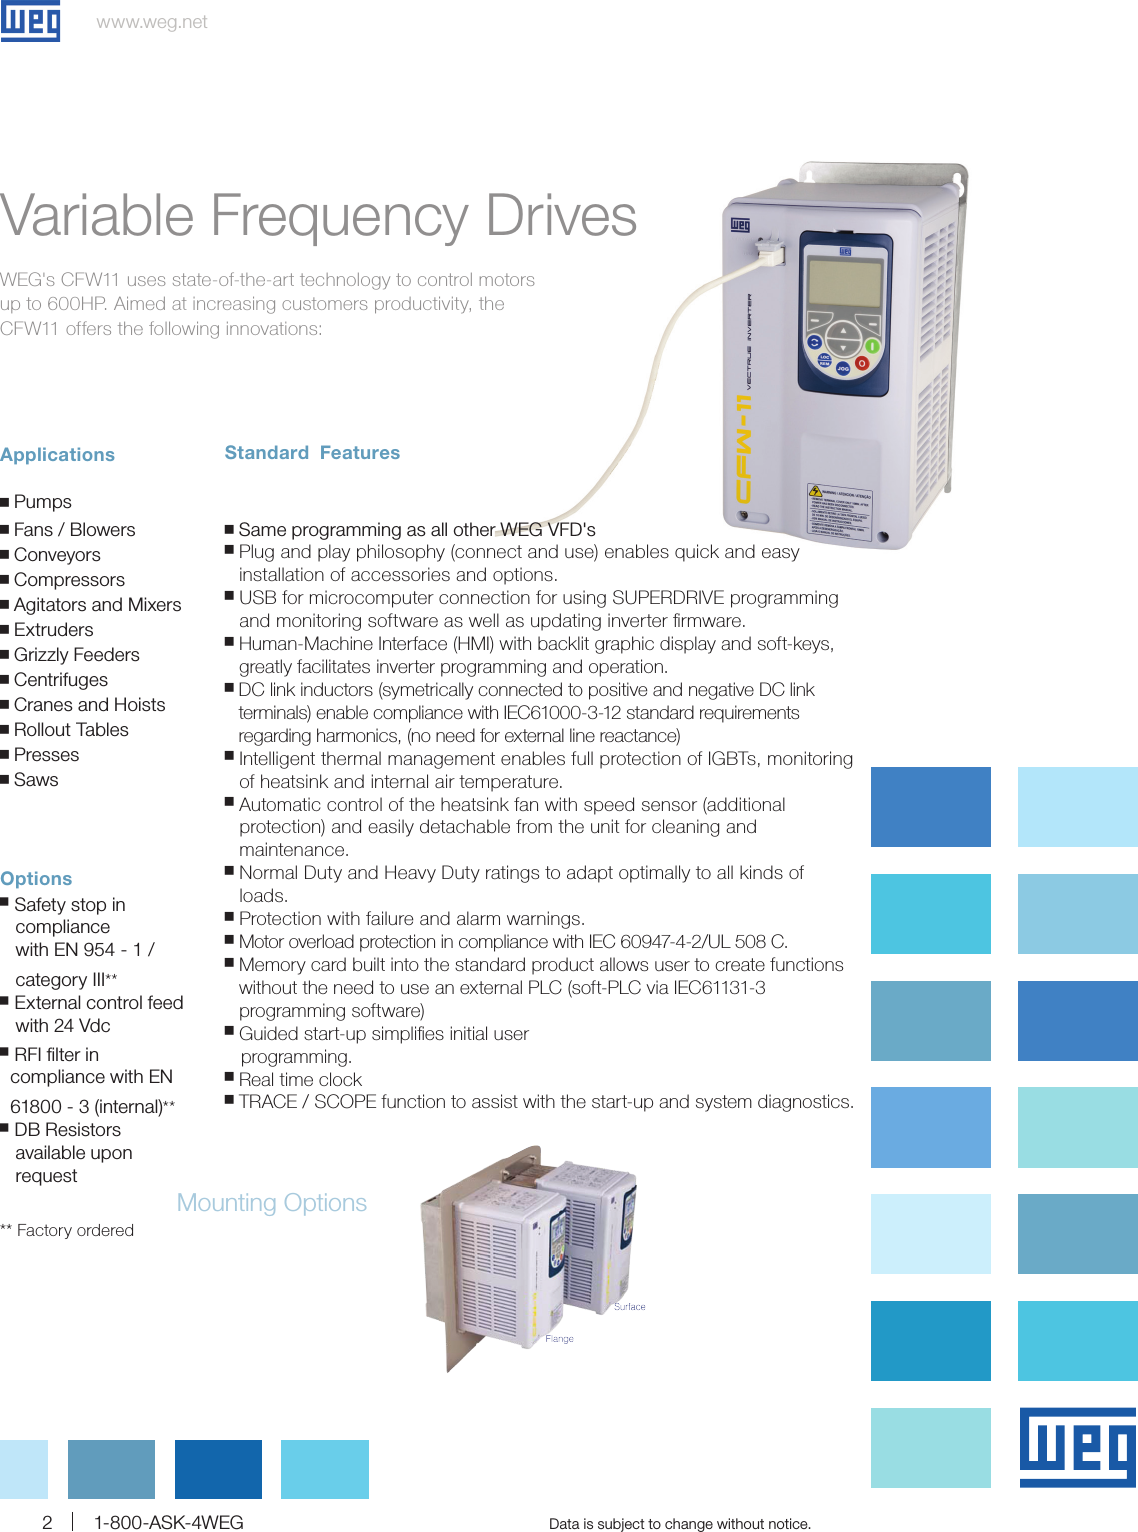 Page 2 of 12 - 103146 1 Weg Variable Frequency Drive Brochure User Manual